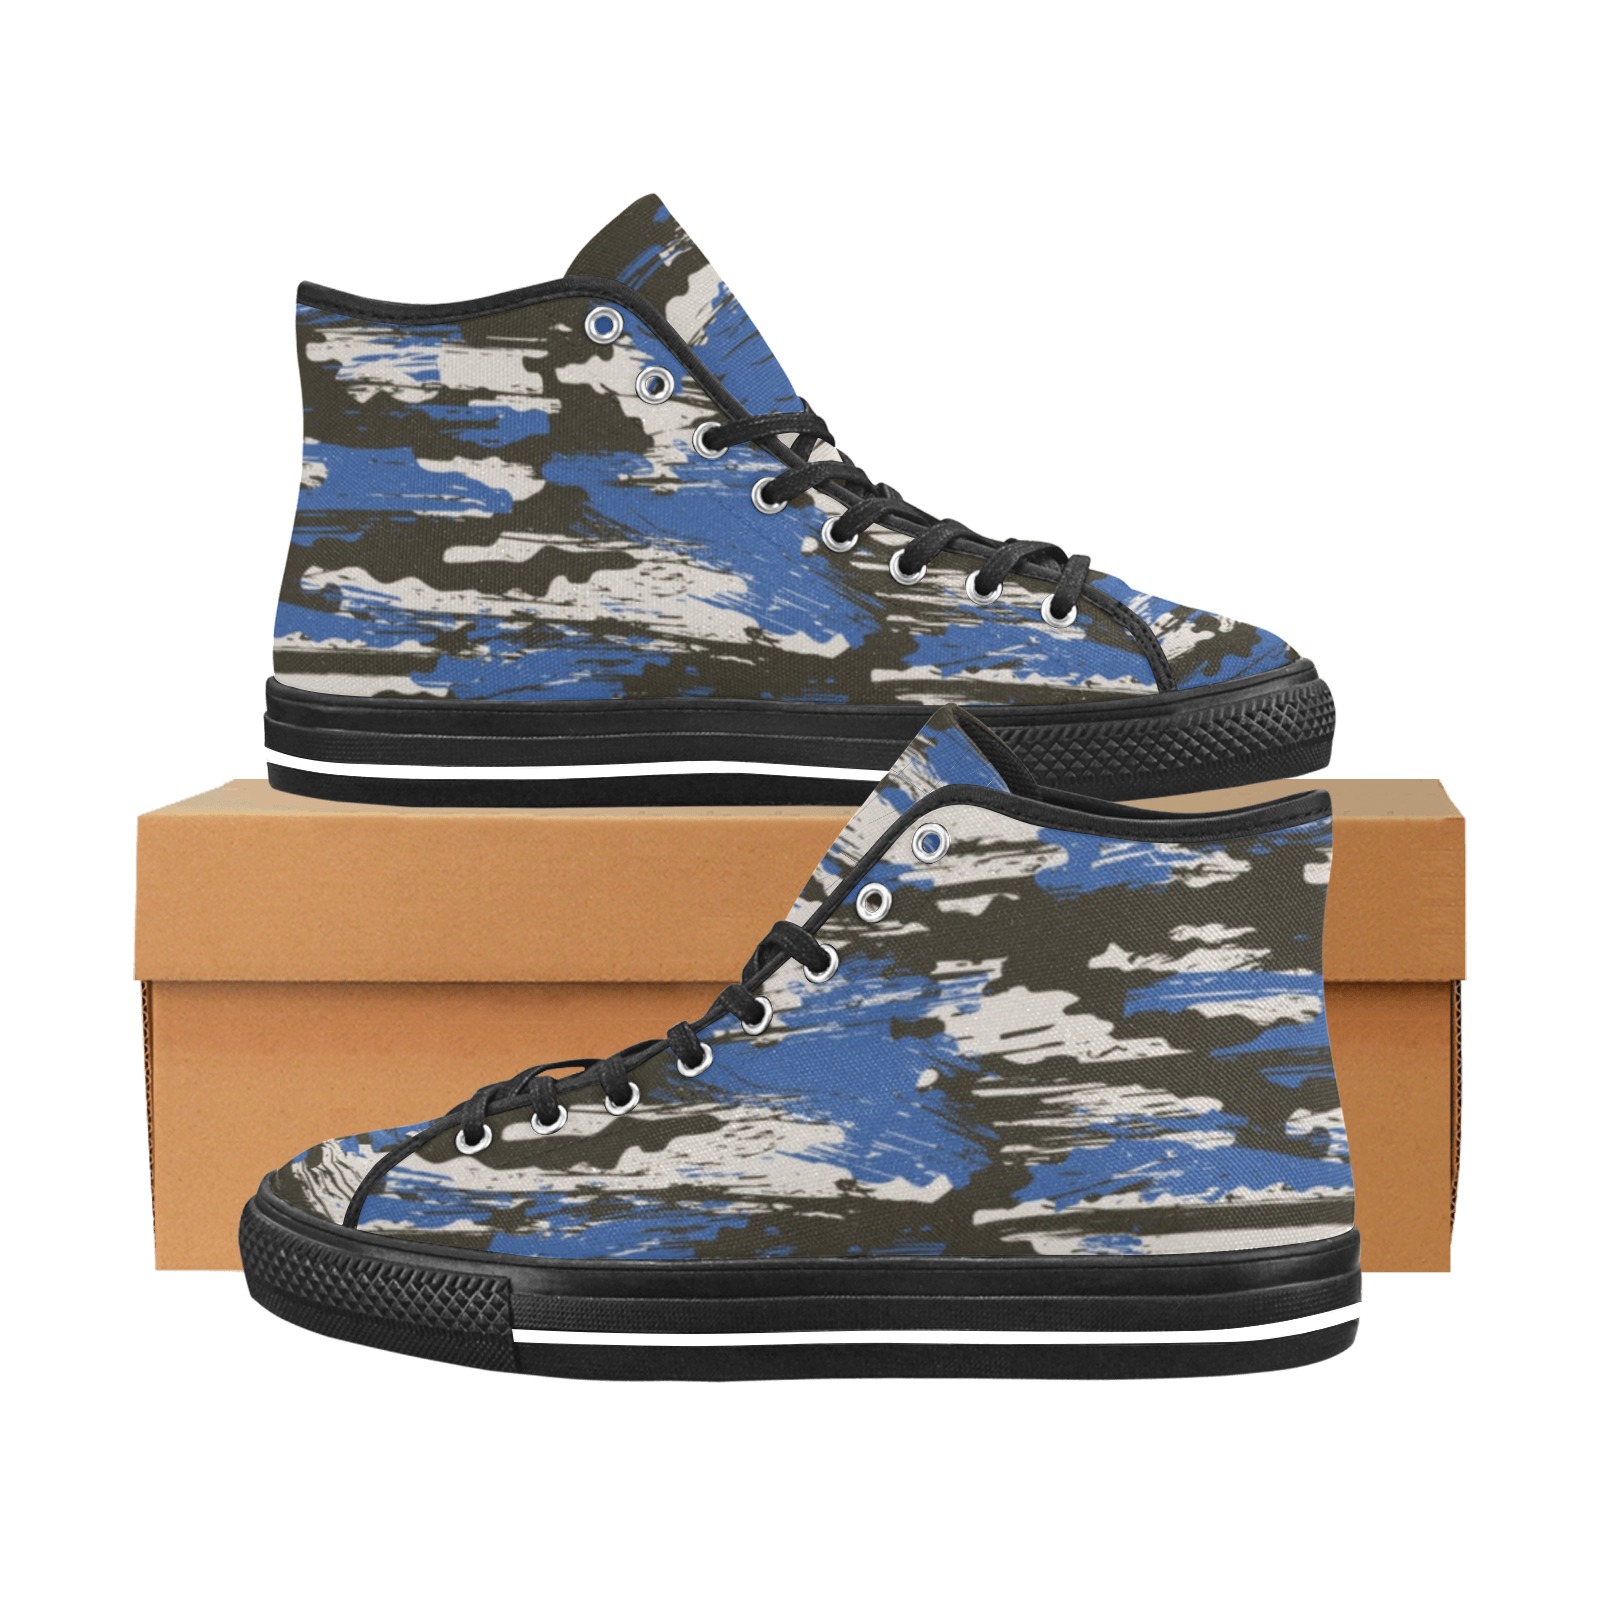 Modern camouflage texture-544 Vancouver H Women's Canvas Shoes (1013-1)